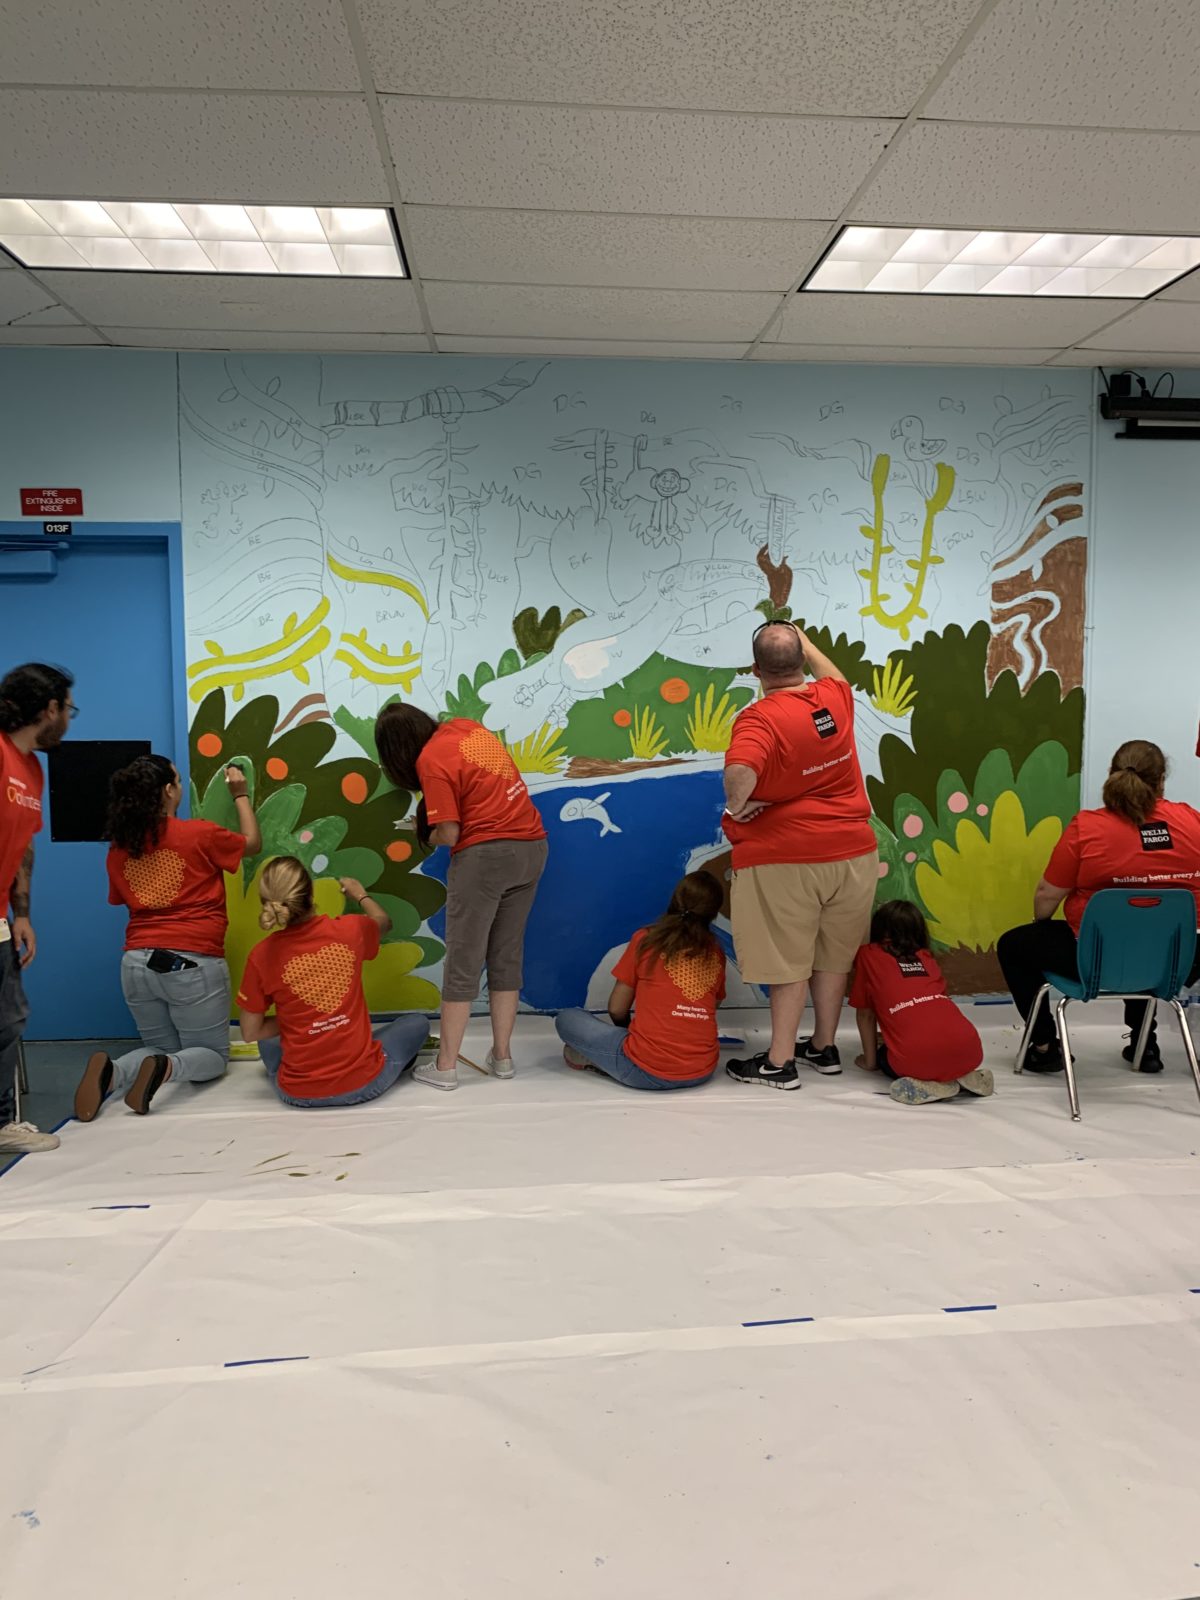 Wells Fargo Day of Service Mural Project at Neva King Cooper Educational Center